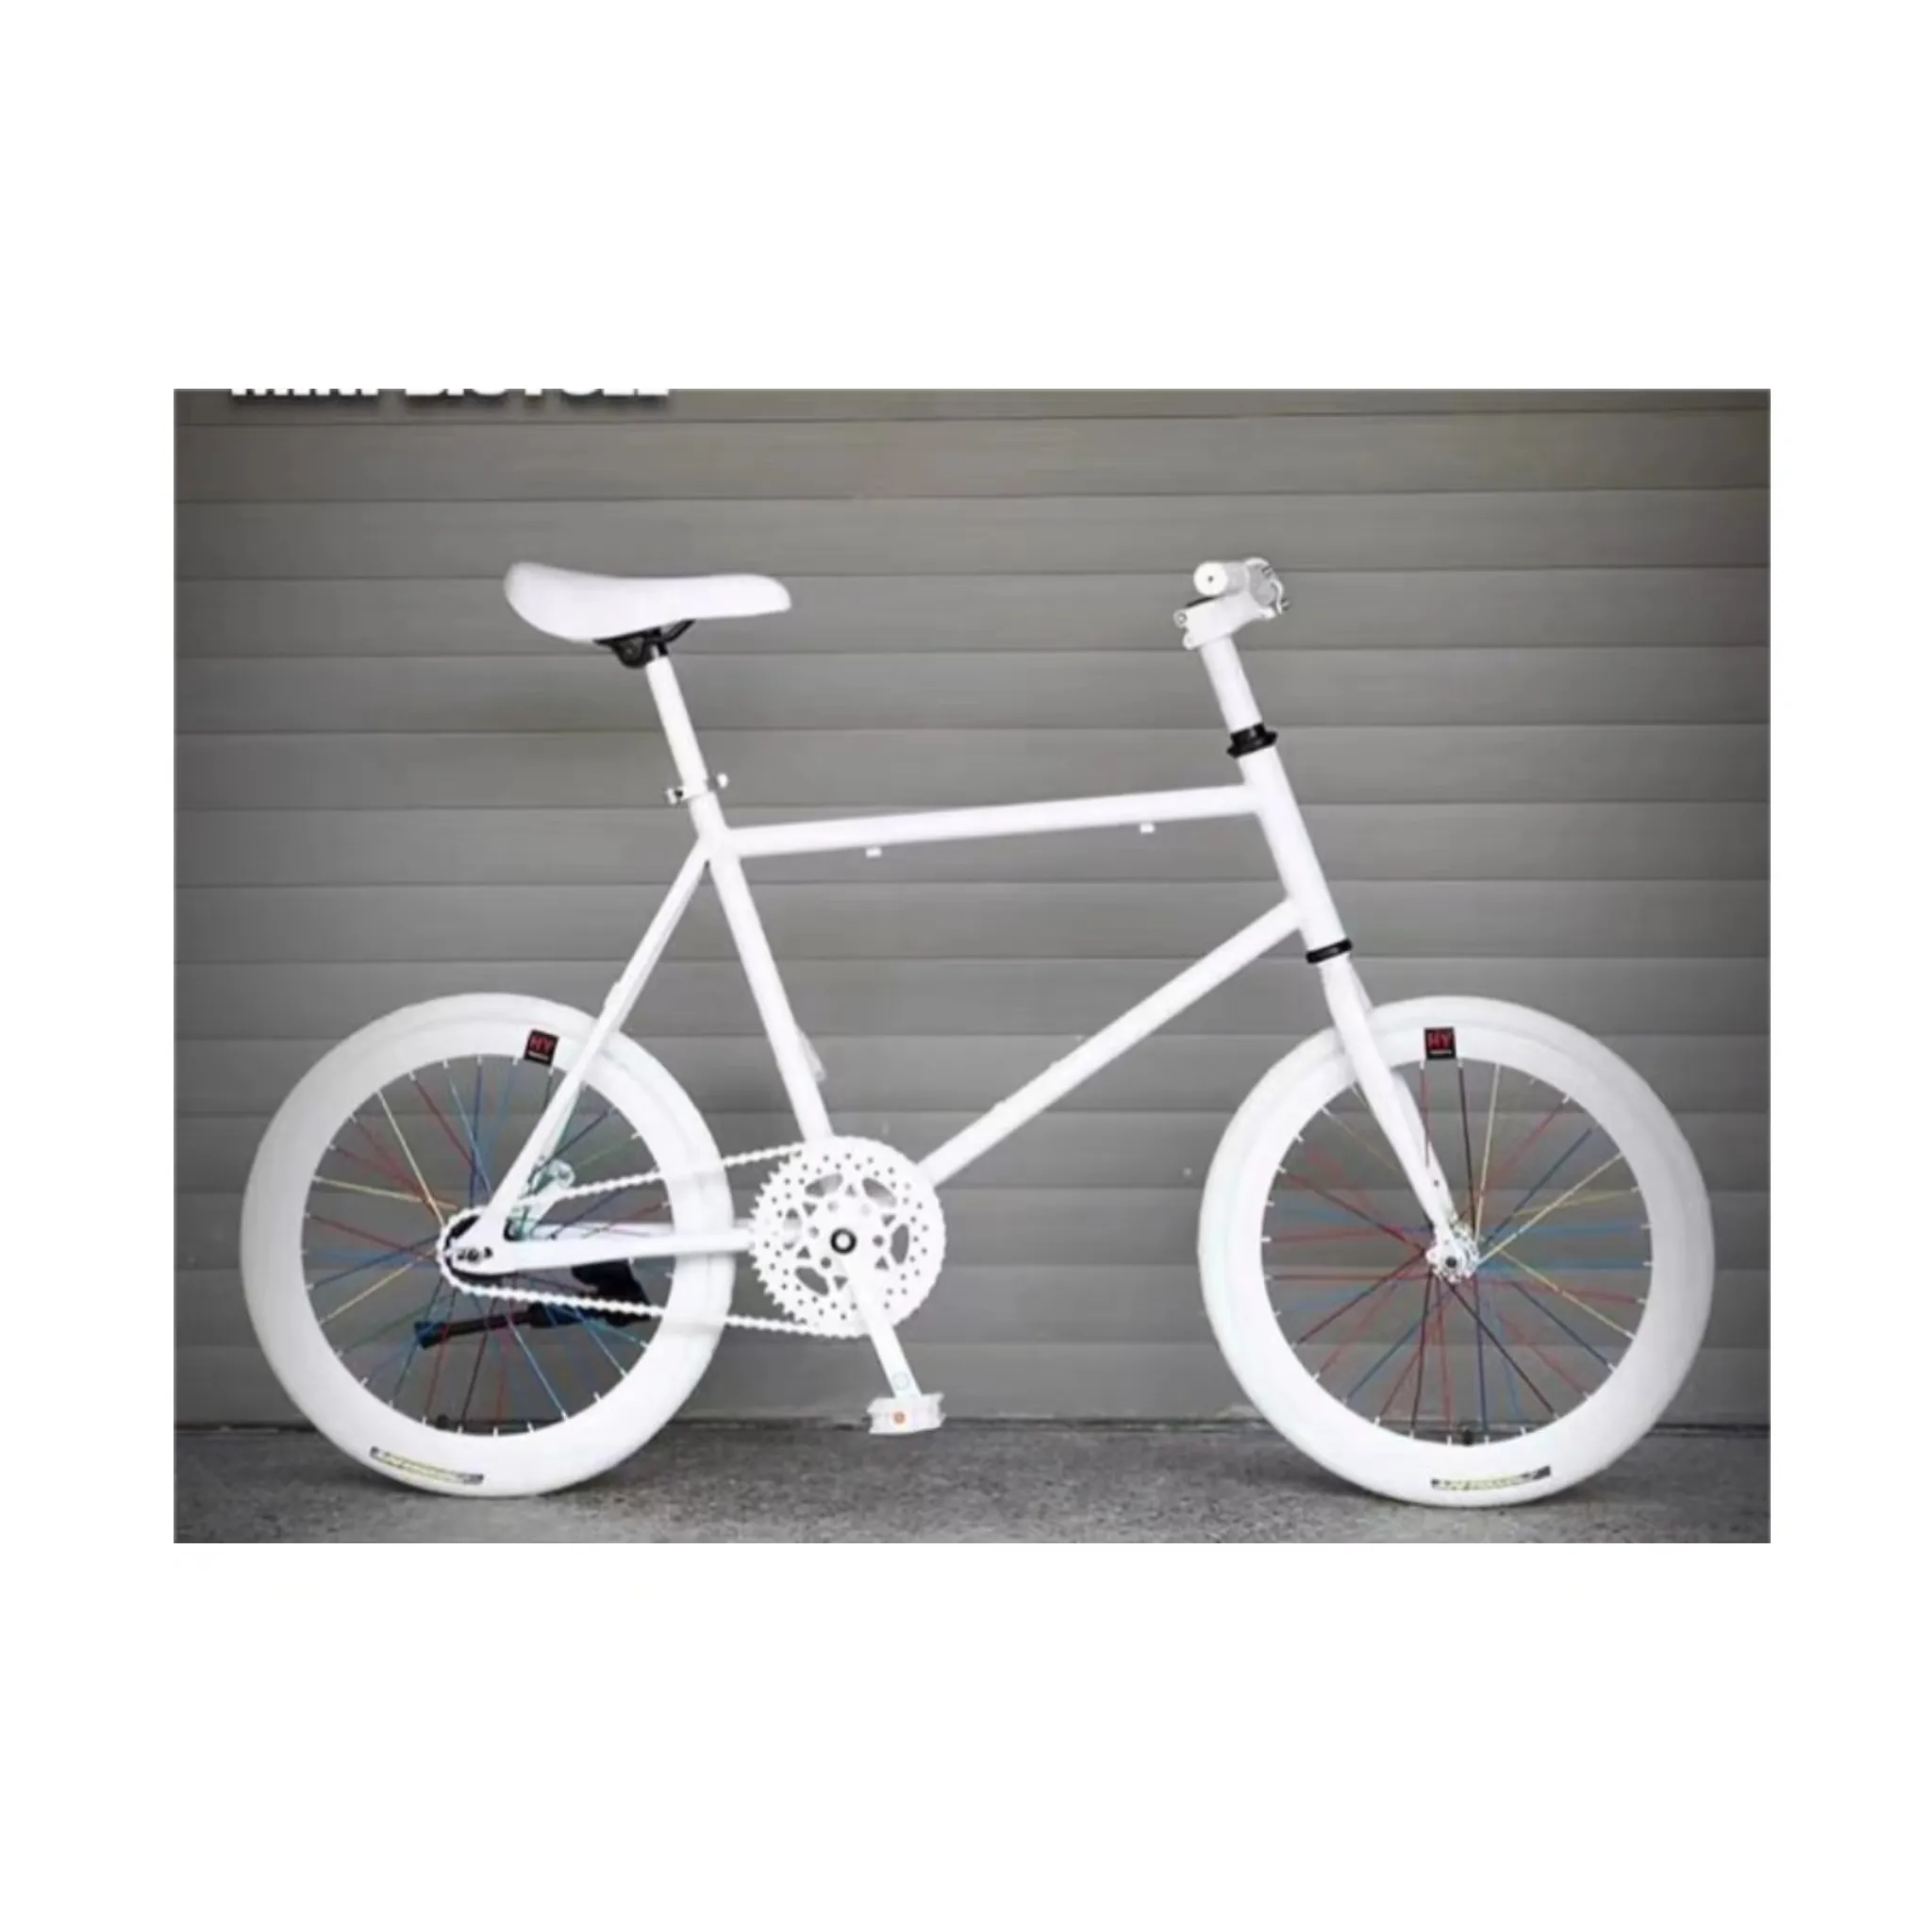 Best Selling Bike Customized Single Speed Adult Bike City Bicycles With Comfortable Saddle Made In Chiina